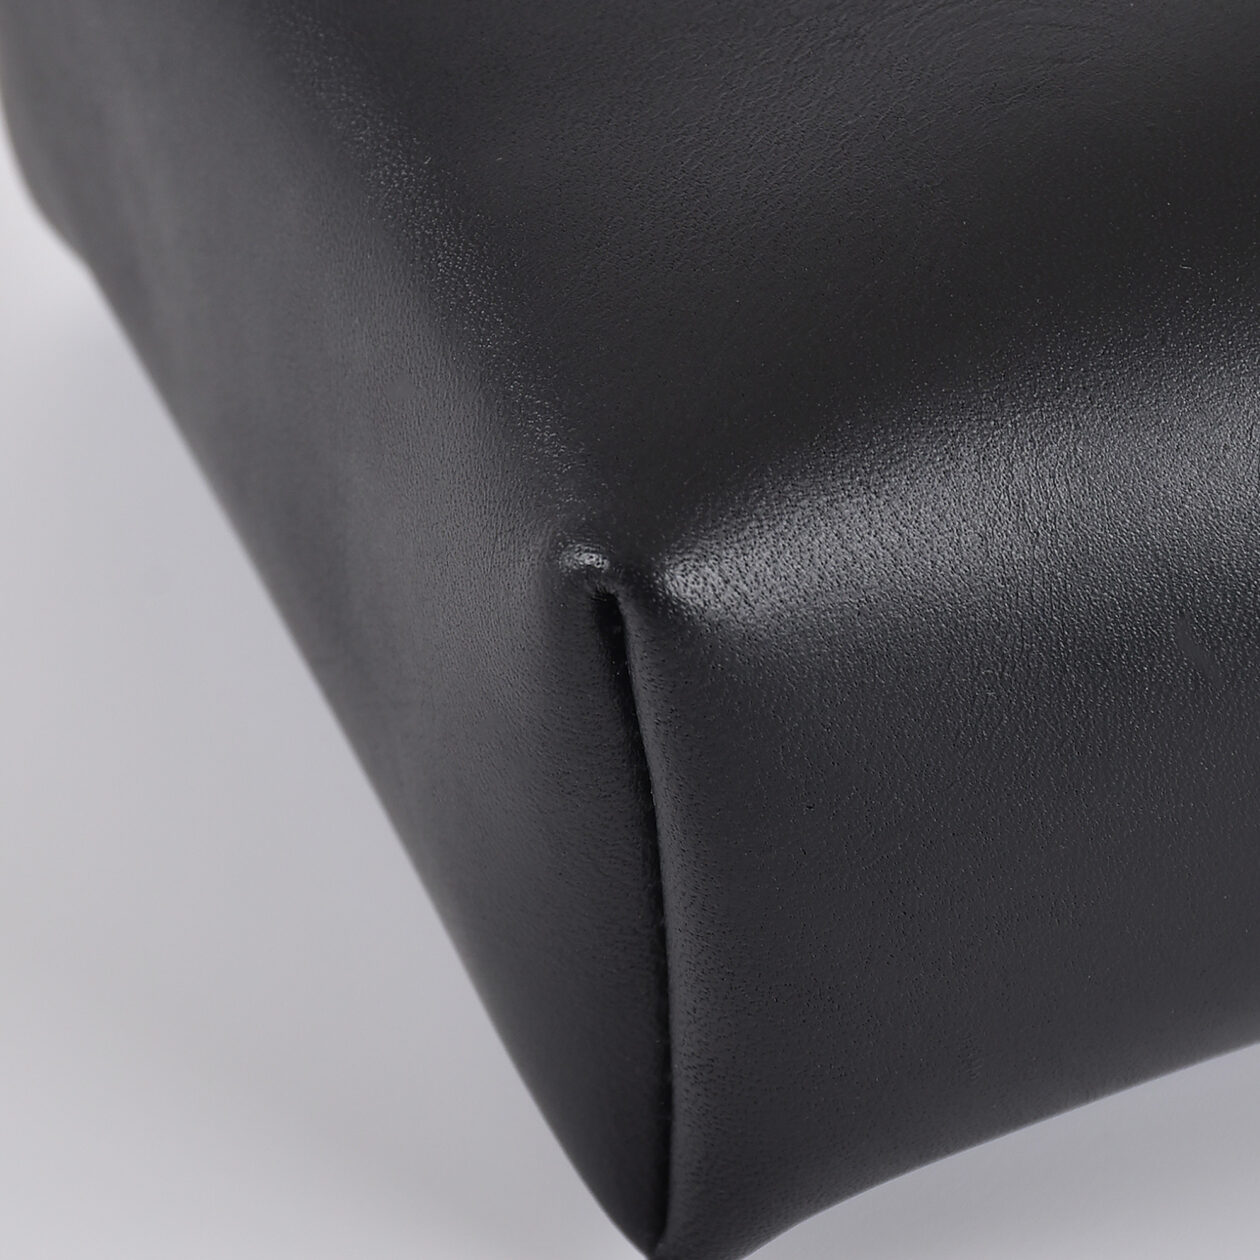 TISSUE COVER oiled leather black detail